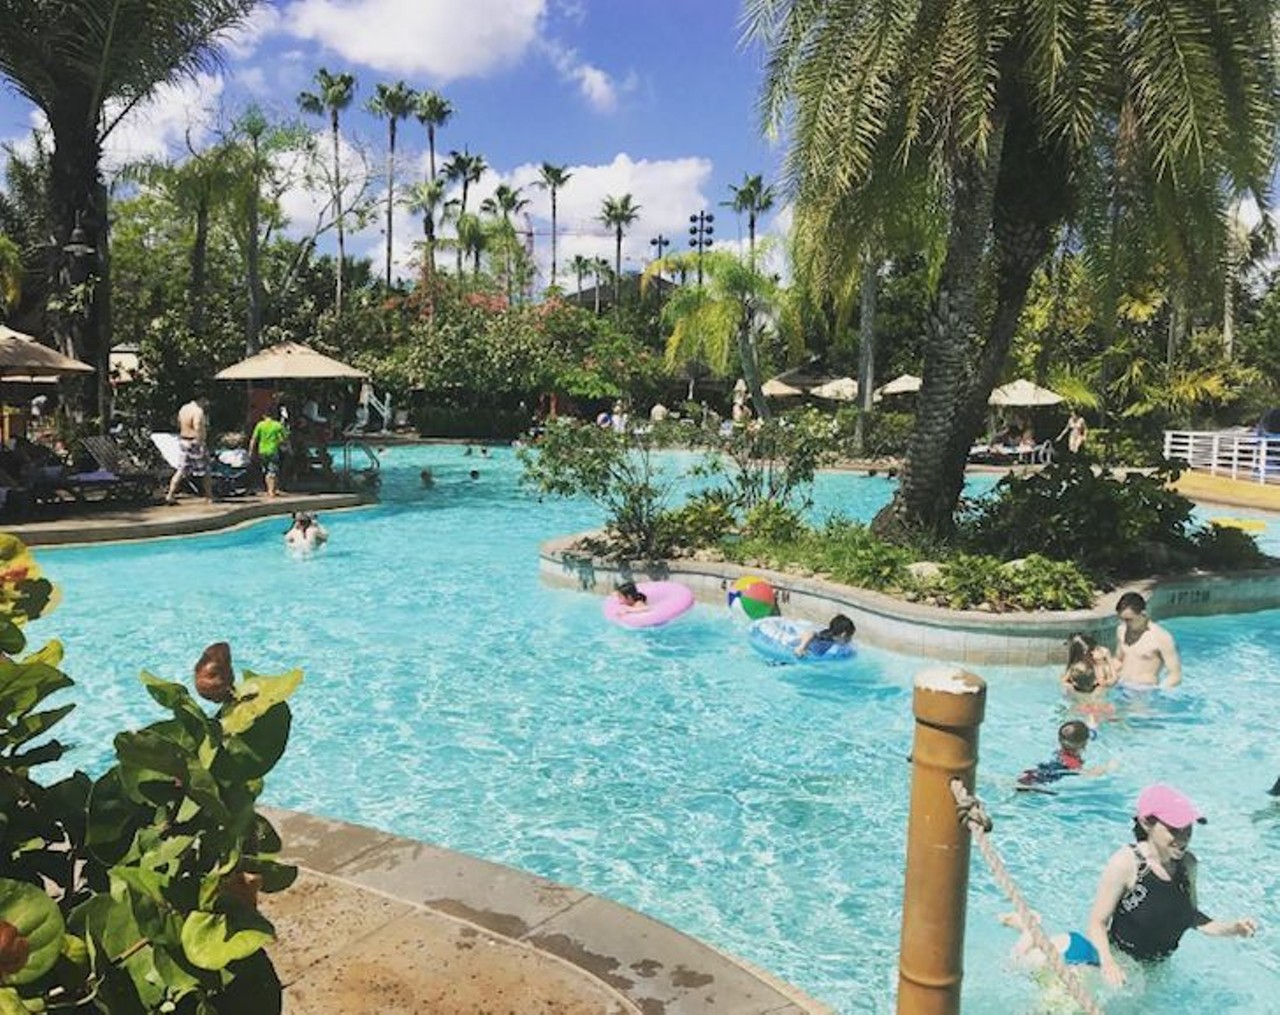 Loews Royal Pacific Resort at Universal Orlando 
6300 Hollywood Way | 407-503-3000 | 8 a.m. - 11 p.m.
This lagoon-style pool is perfect for the picky family. Kids can splash around in the ship-themed water play area, adults can relax or watch TV in rentable poolside cabanas and and everyone can enjoy activities like pool basketball, hula hoop contests, ping pong tournaments and weekly &#147;dive in&#148; movies. Friends and family can accompany registered guests to the pools, but only if they stay together at all times.
Photo via pcereijo/Instagram